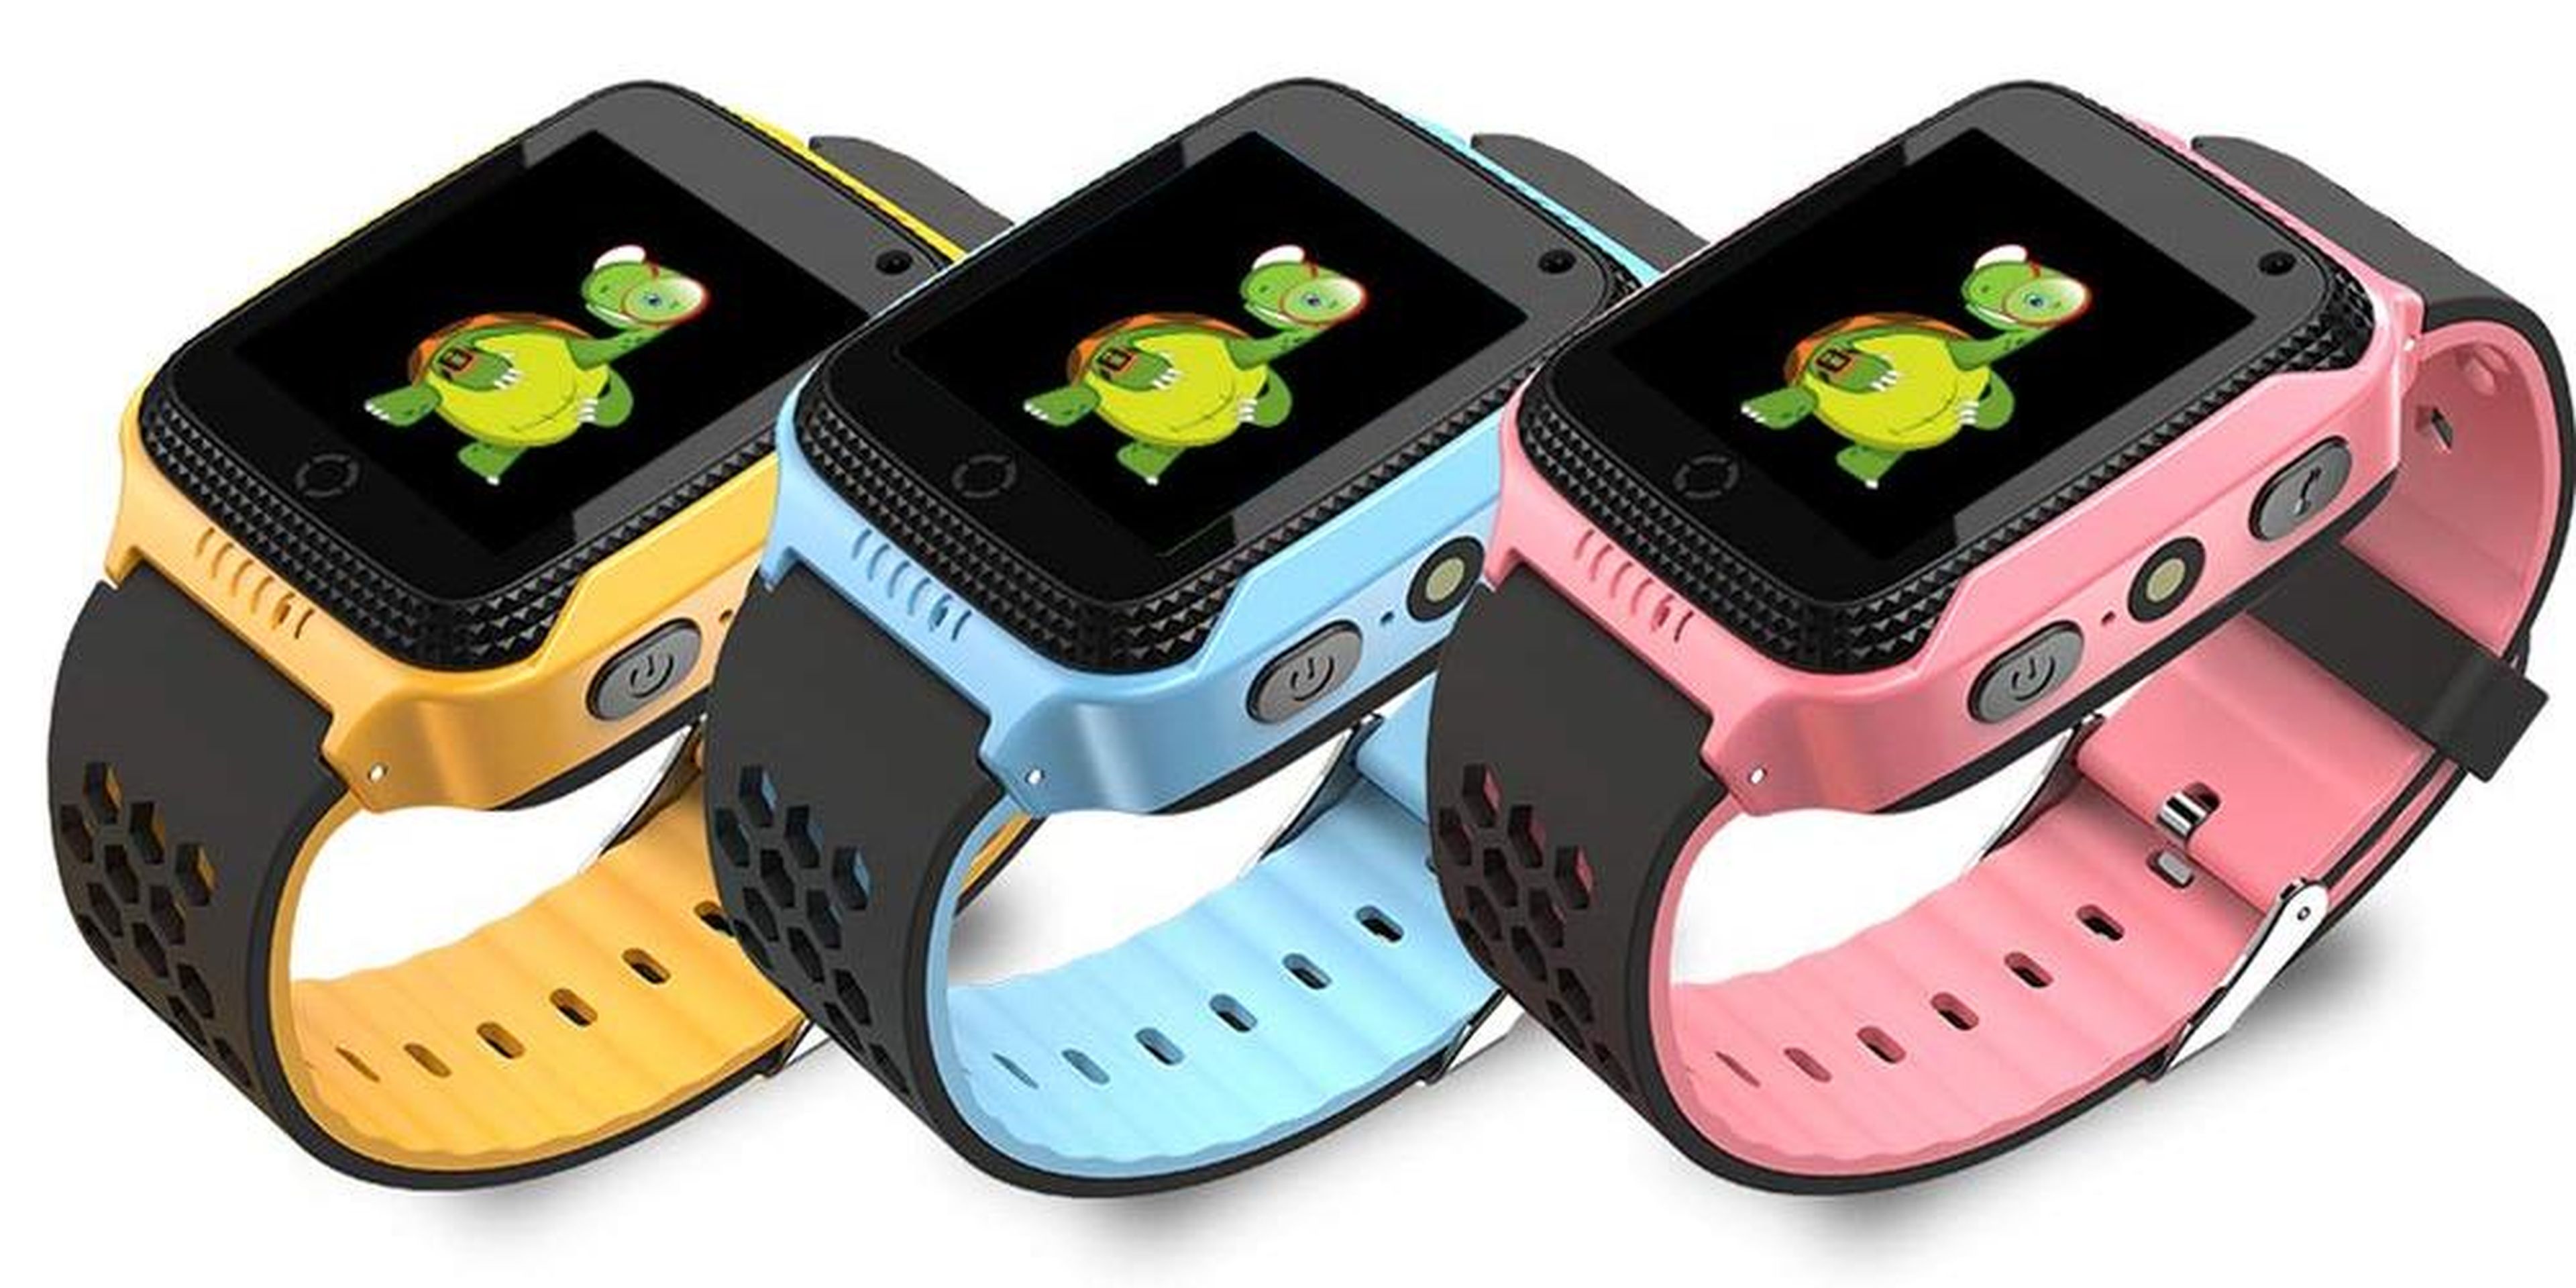 The SmartTurtle Kid's Smartwatch is one of several generic smartwatches sold on Amazon that Rapid7 found to have serious security flaws.